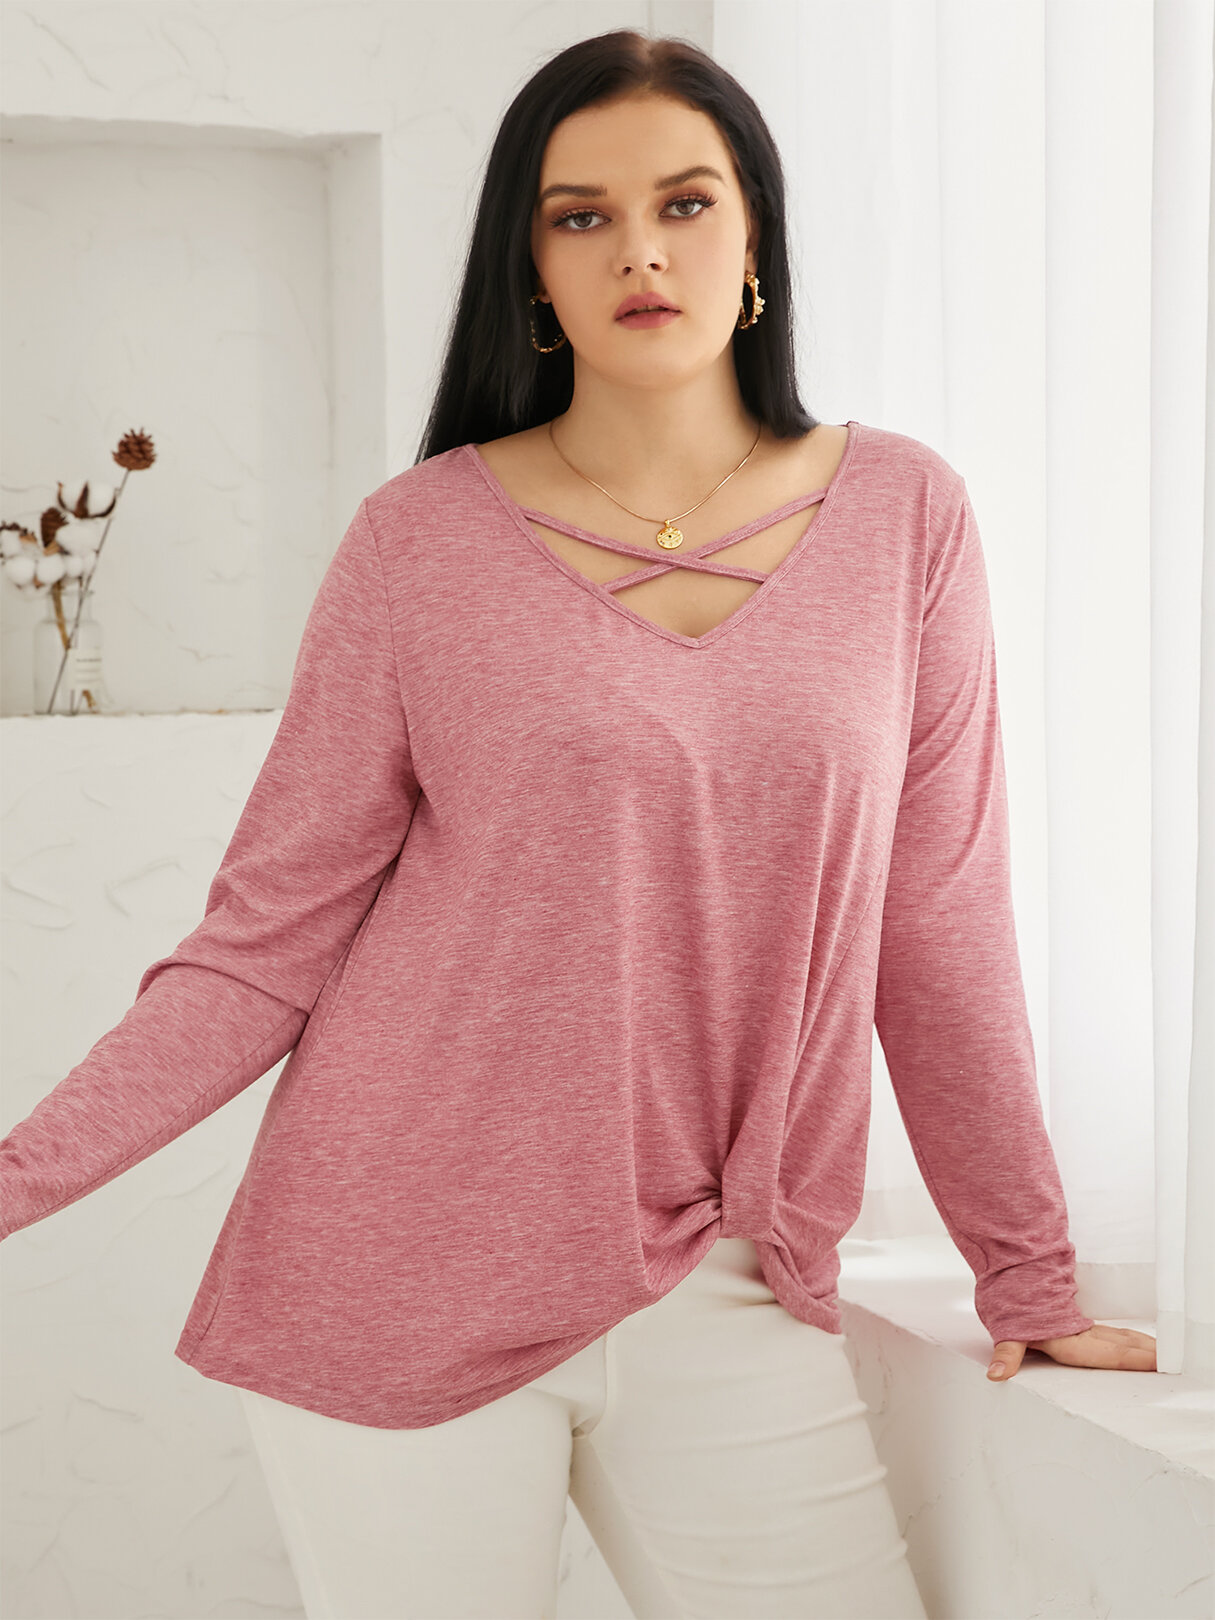 Plus Size V-neck Criss-Cross Twist Long Sleeves Tee, Pink;gray